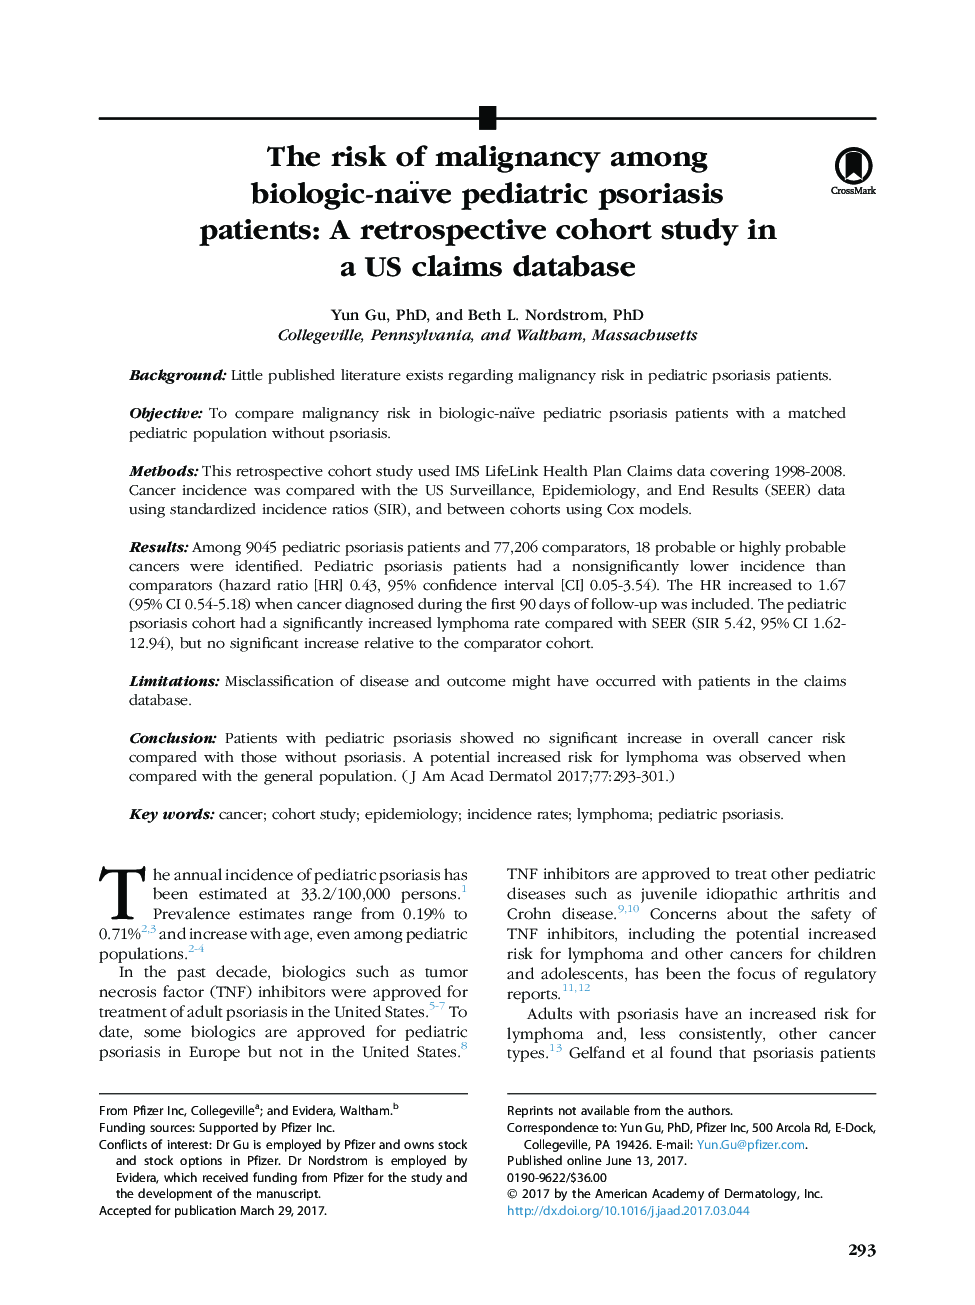 The risk of malignancy among biologic-naïve pediatric psoriasis patients: A retrospective cohort study in a US claims database